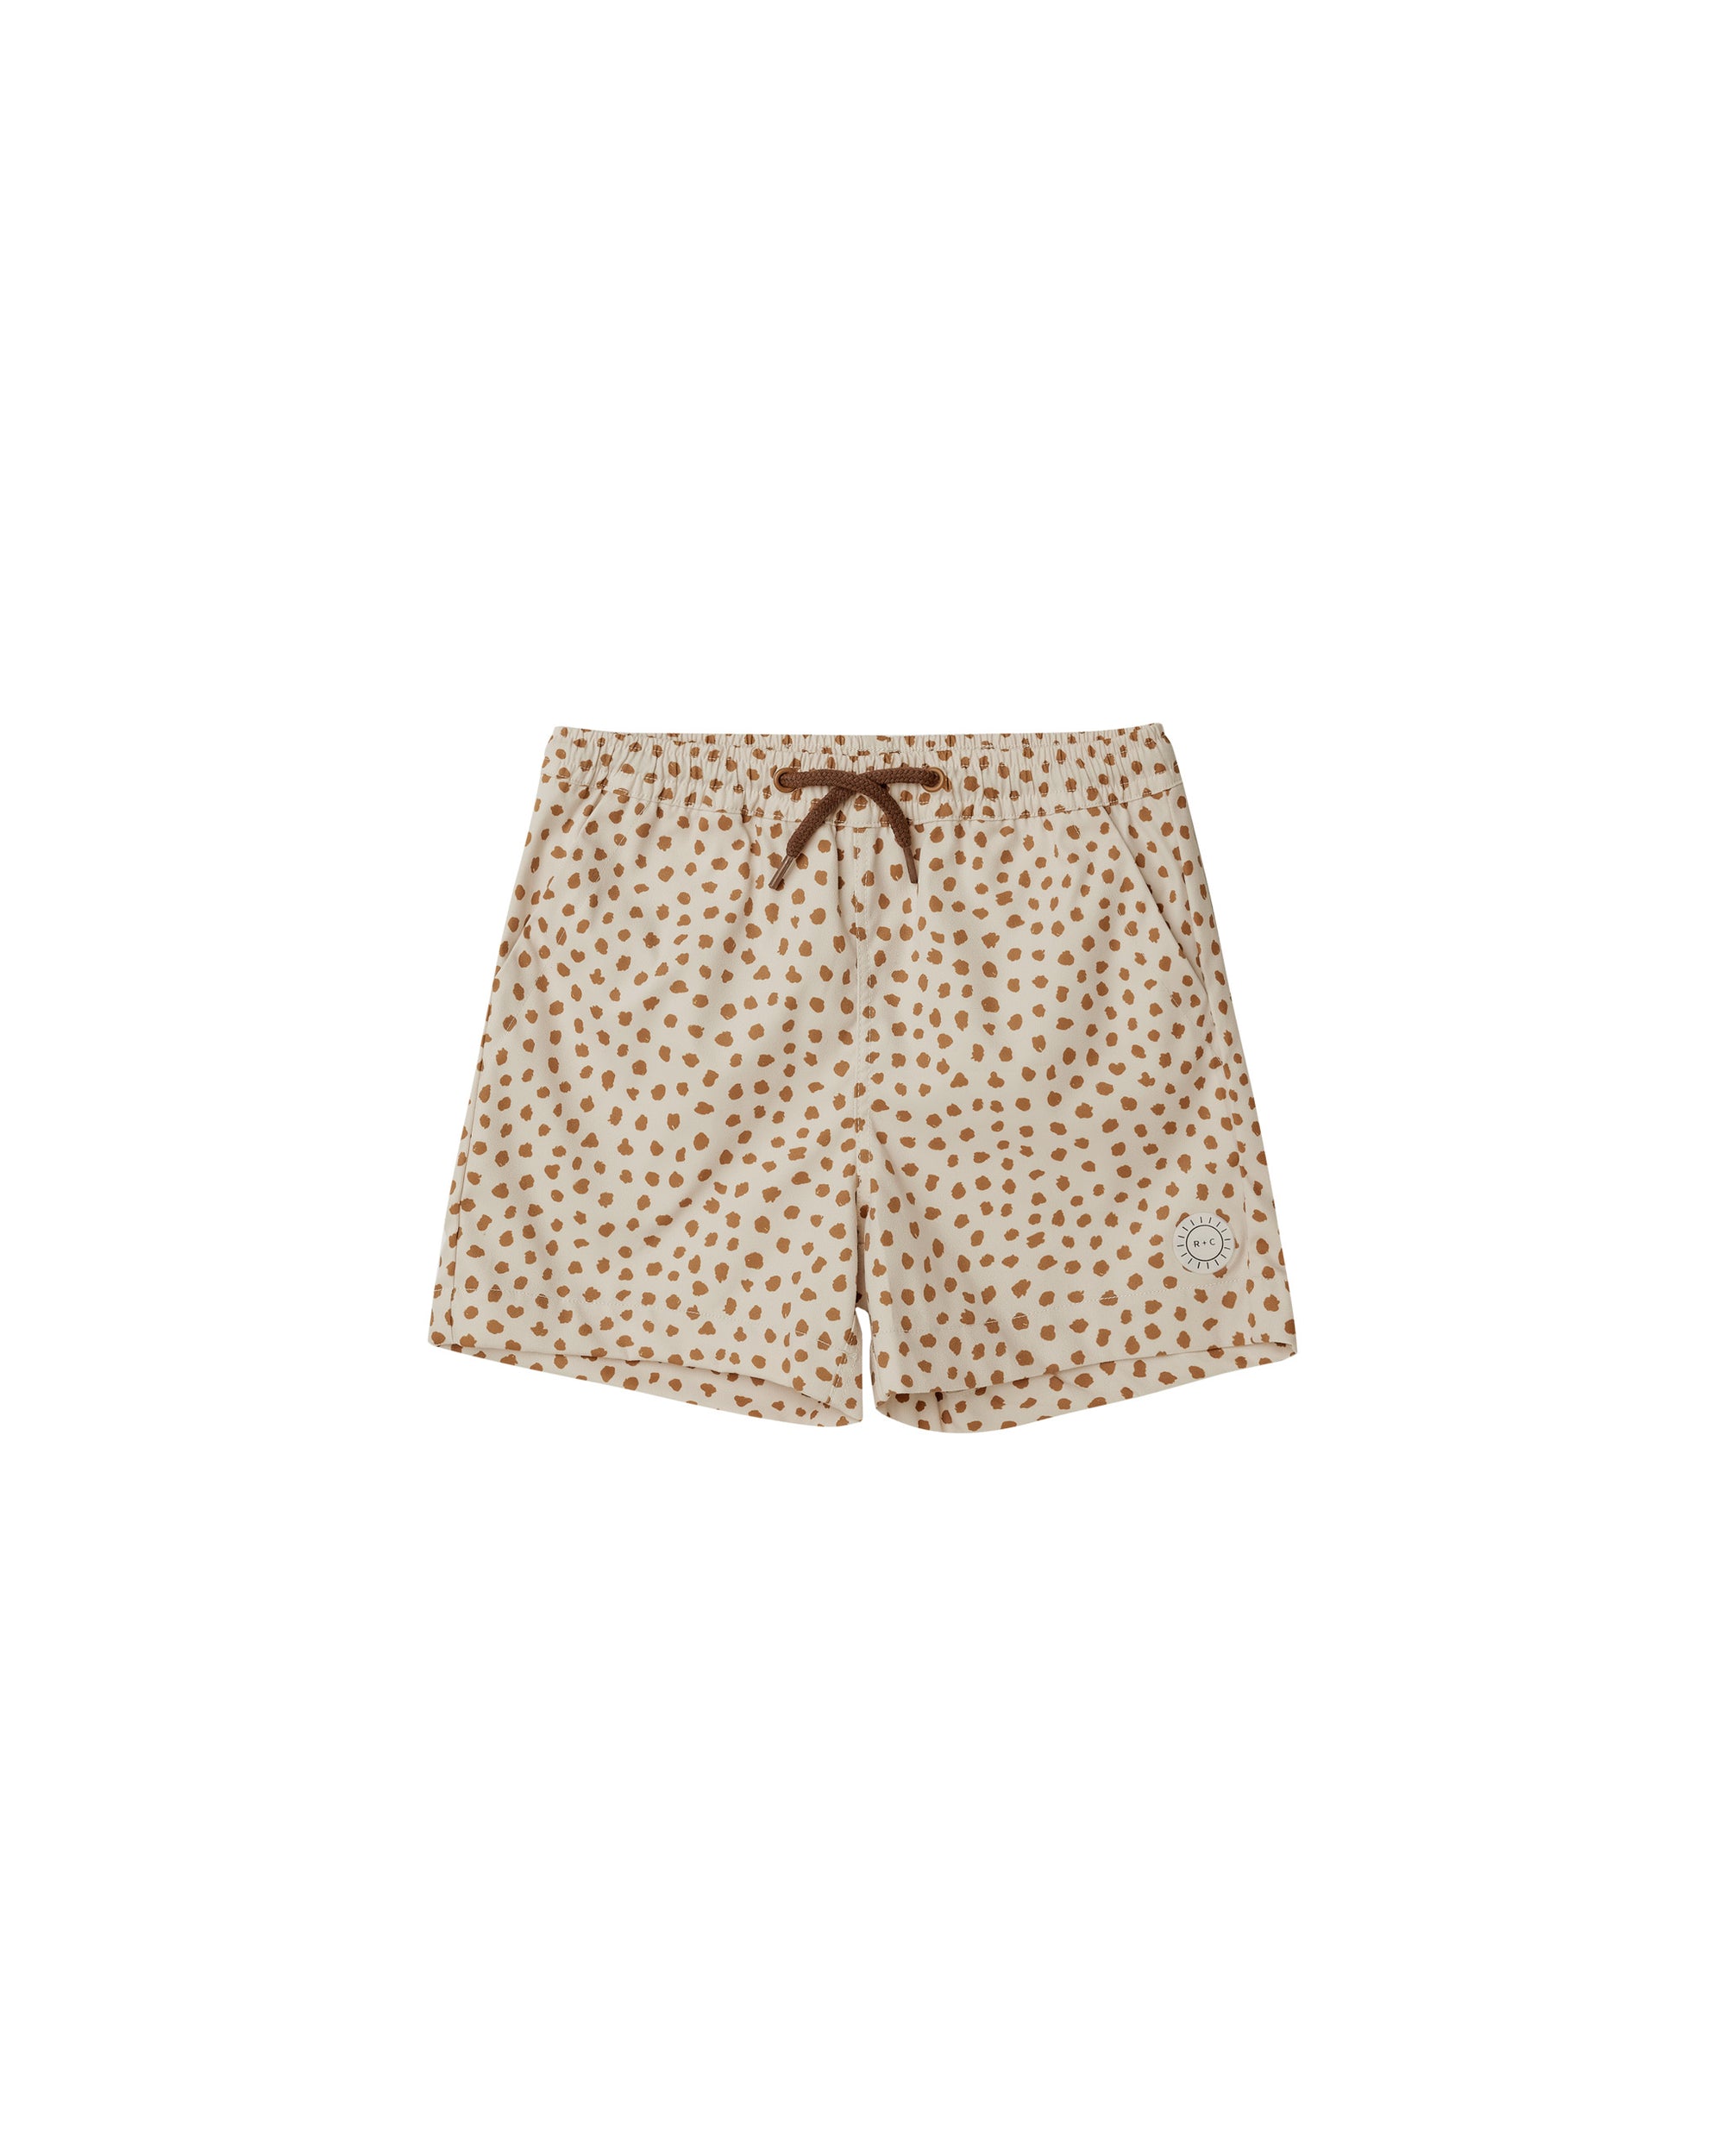 boys board short in spotted print